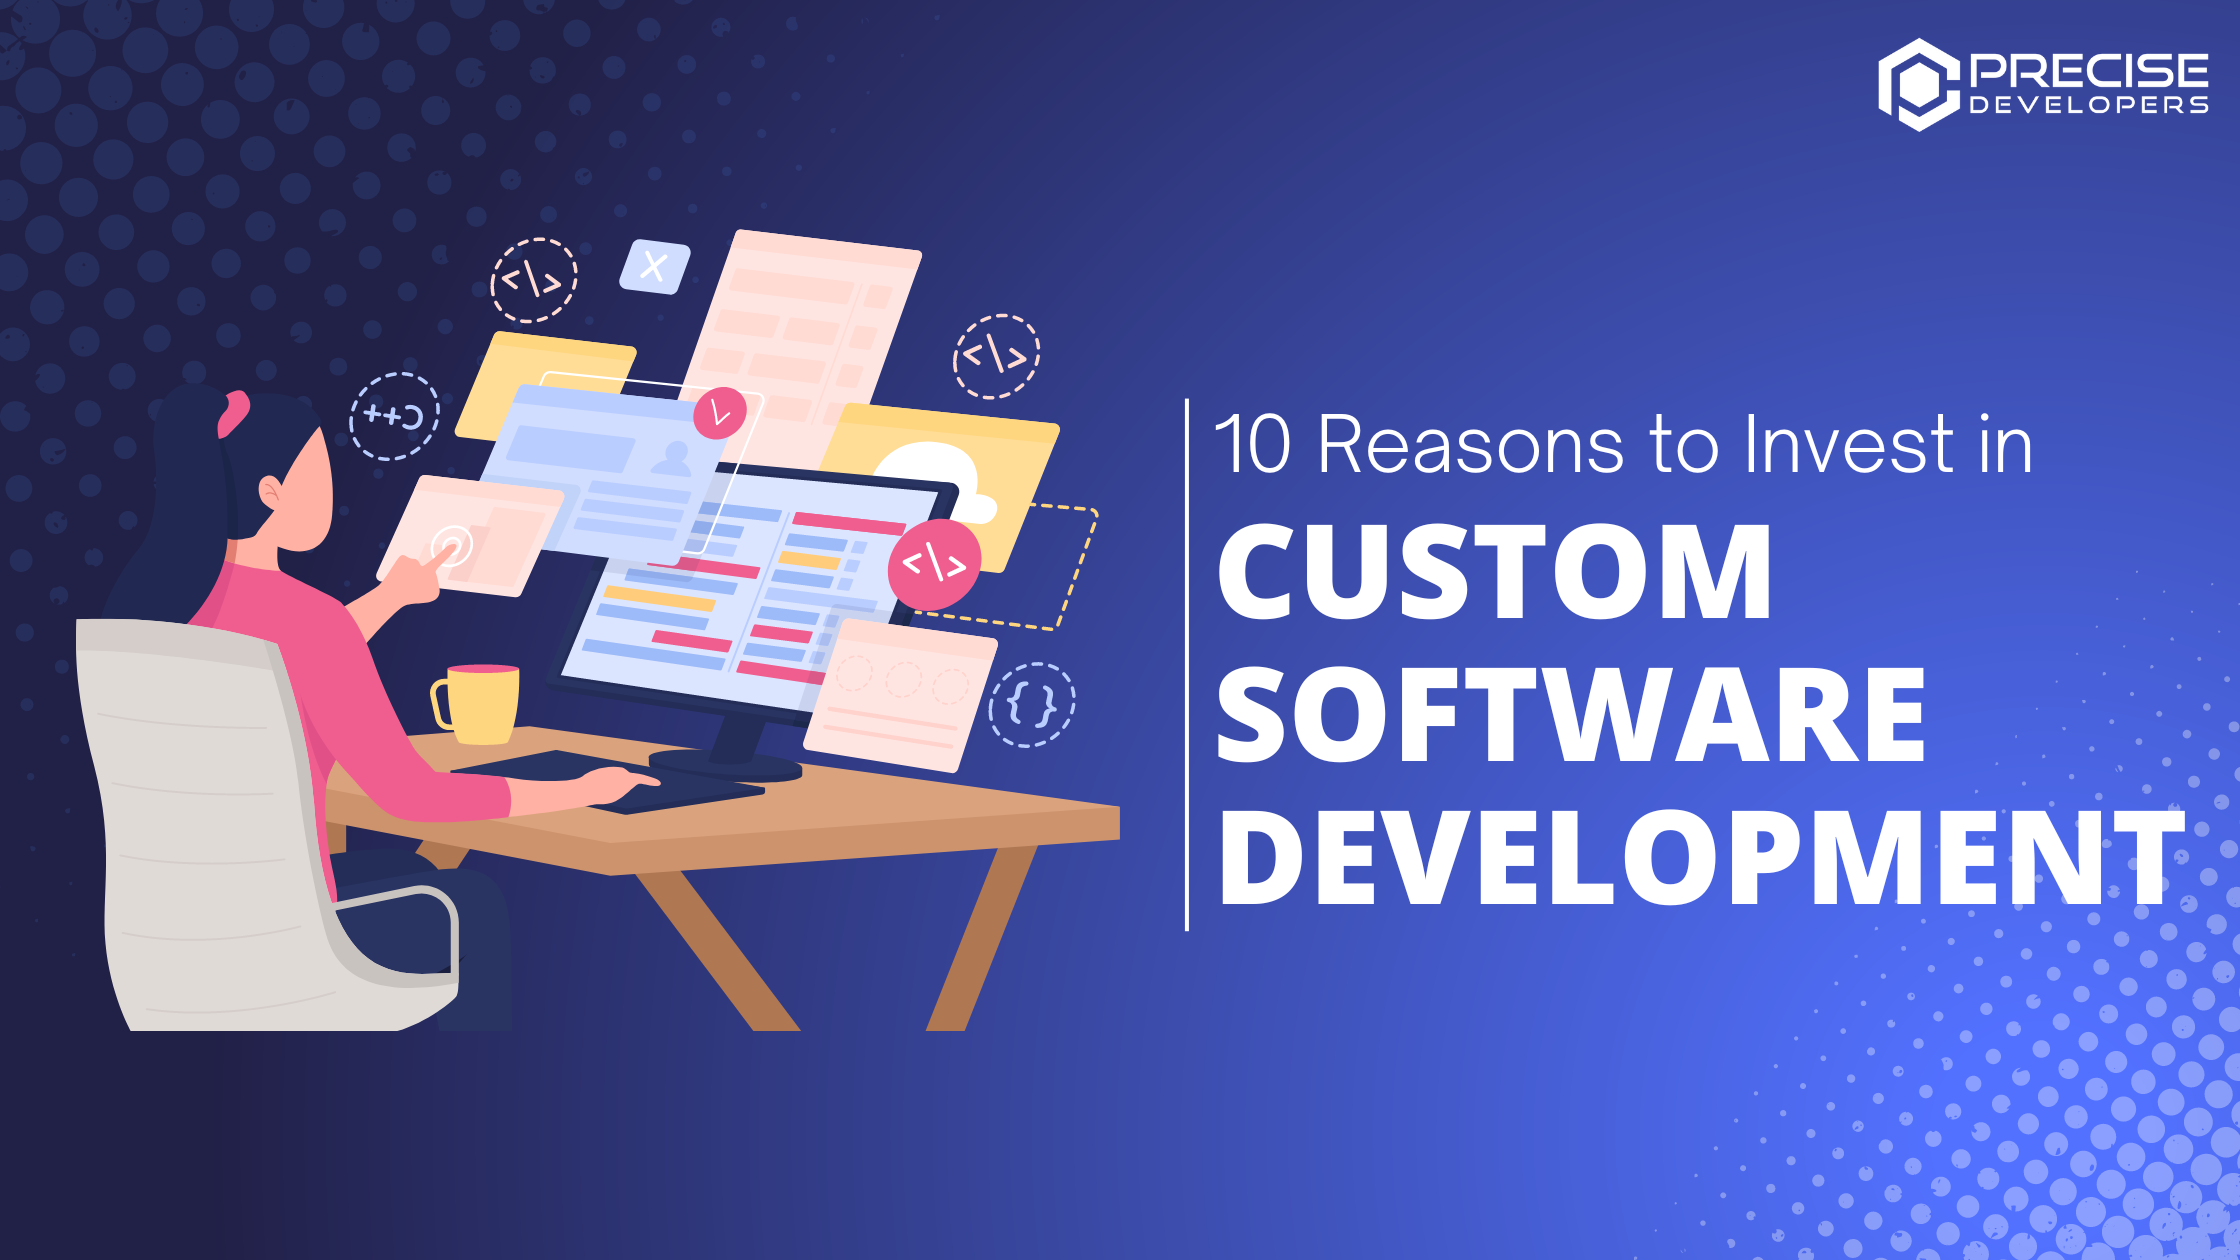 10 Reasons to Invest in Custom Software Development